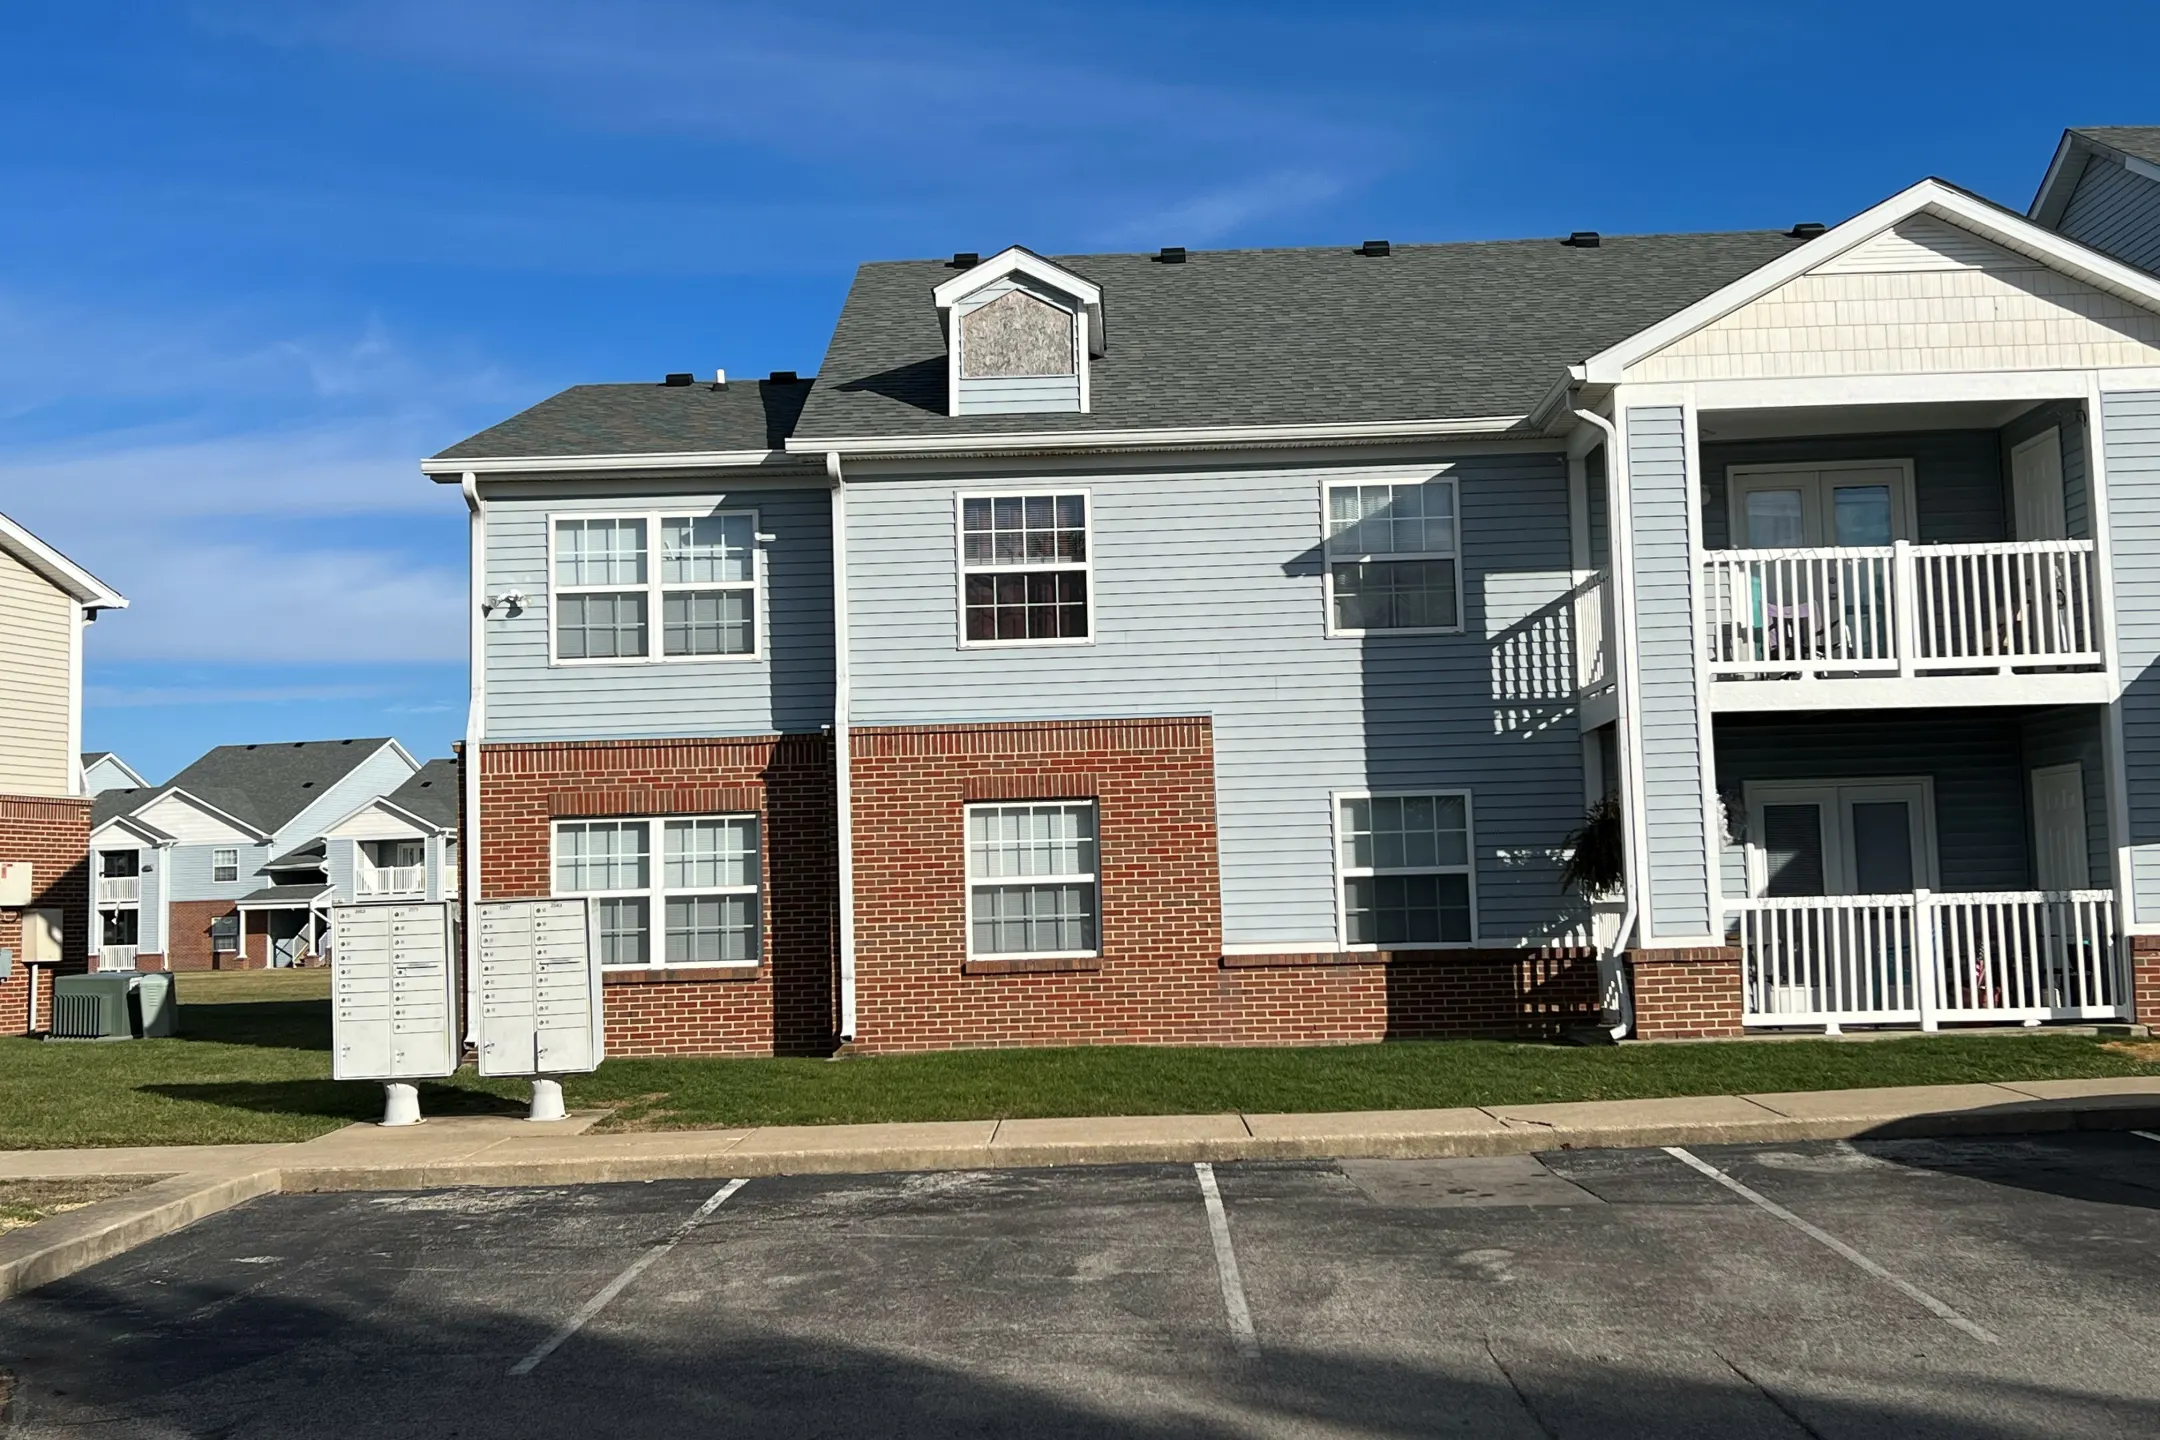 Building - Village Crossing Apartments - Greenwood, IN